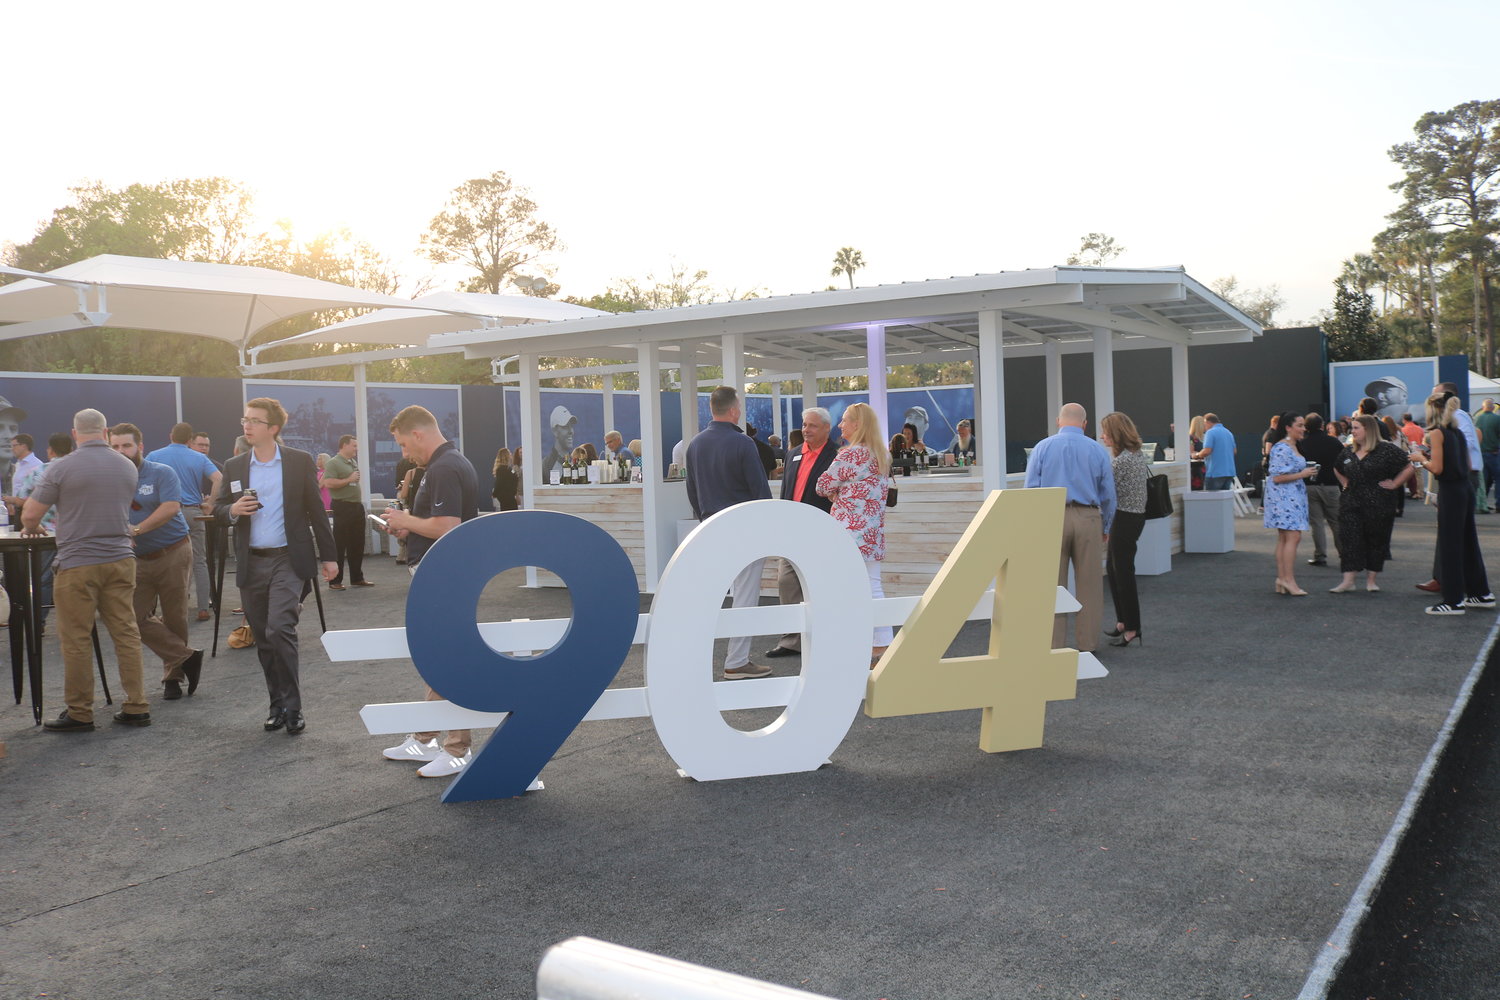 Attendees mingle around the big “904” sign at the joint after hours event at TPC Sawgrass.